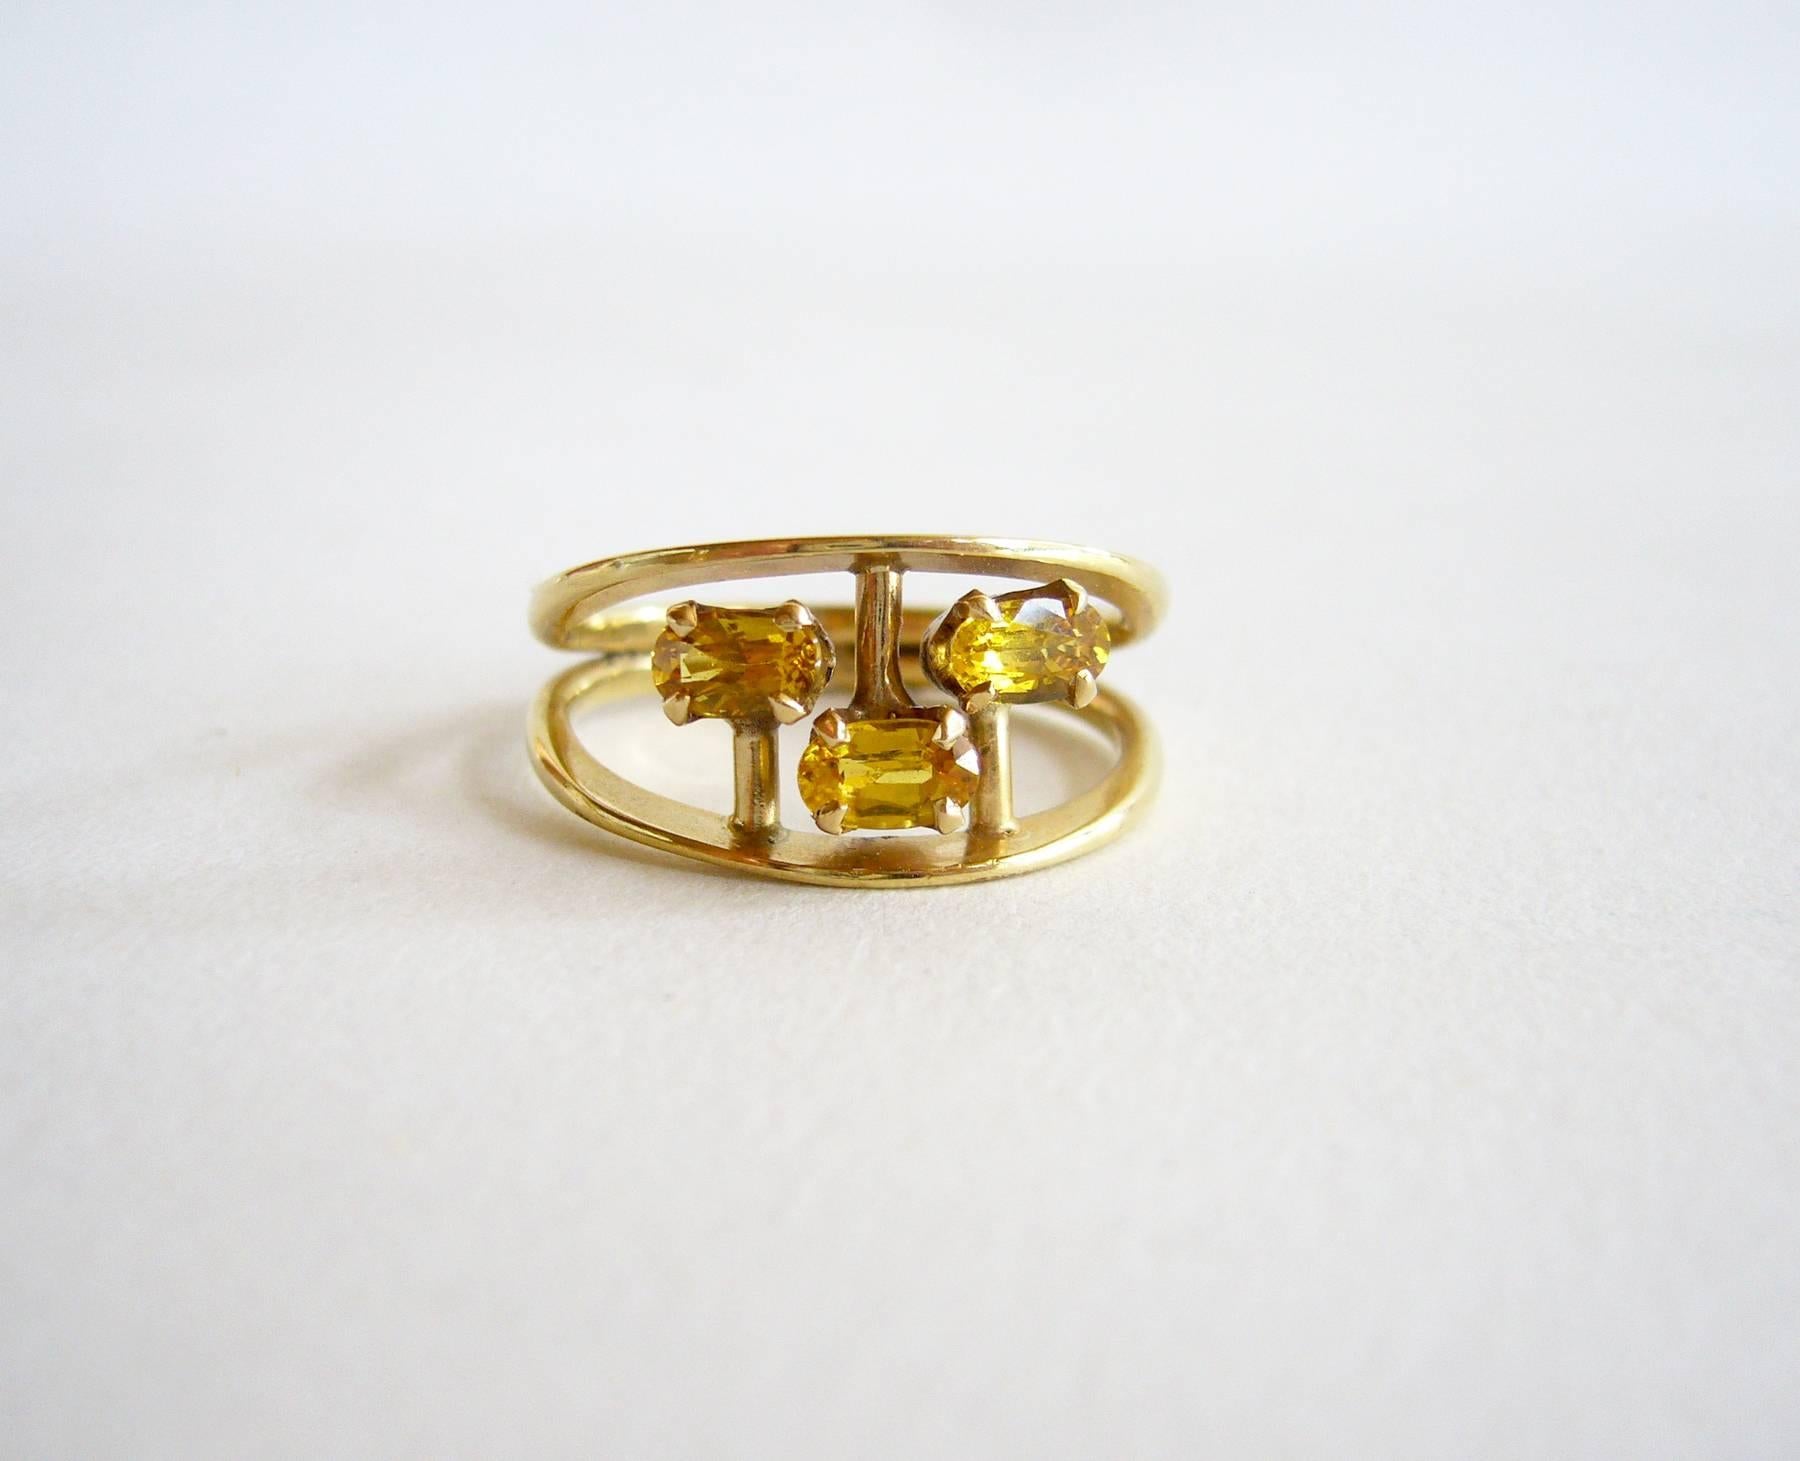 1960's 14k gold and yellow sapphire abstract modernist ring designed and created by American modernist jeweler Jack Nutting of San Francisco, California.  Ring is quite suitable for an engagement or wedding ring and could be worn daily.  A finger